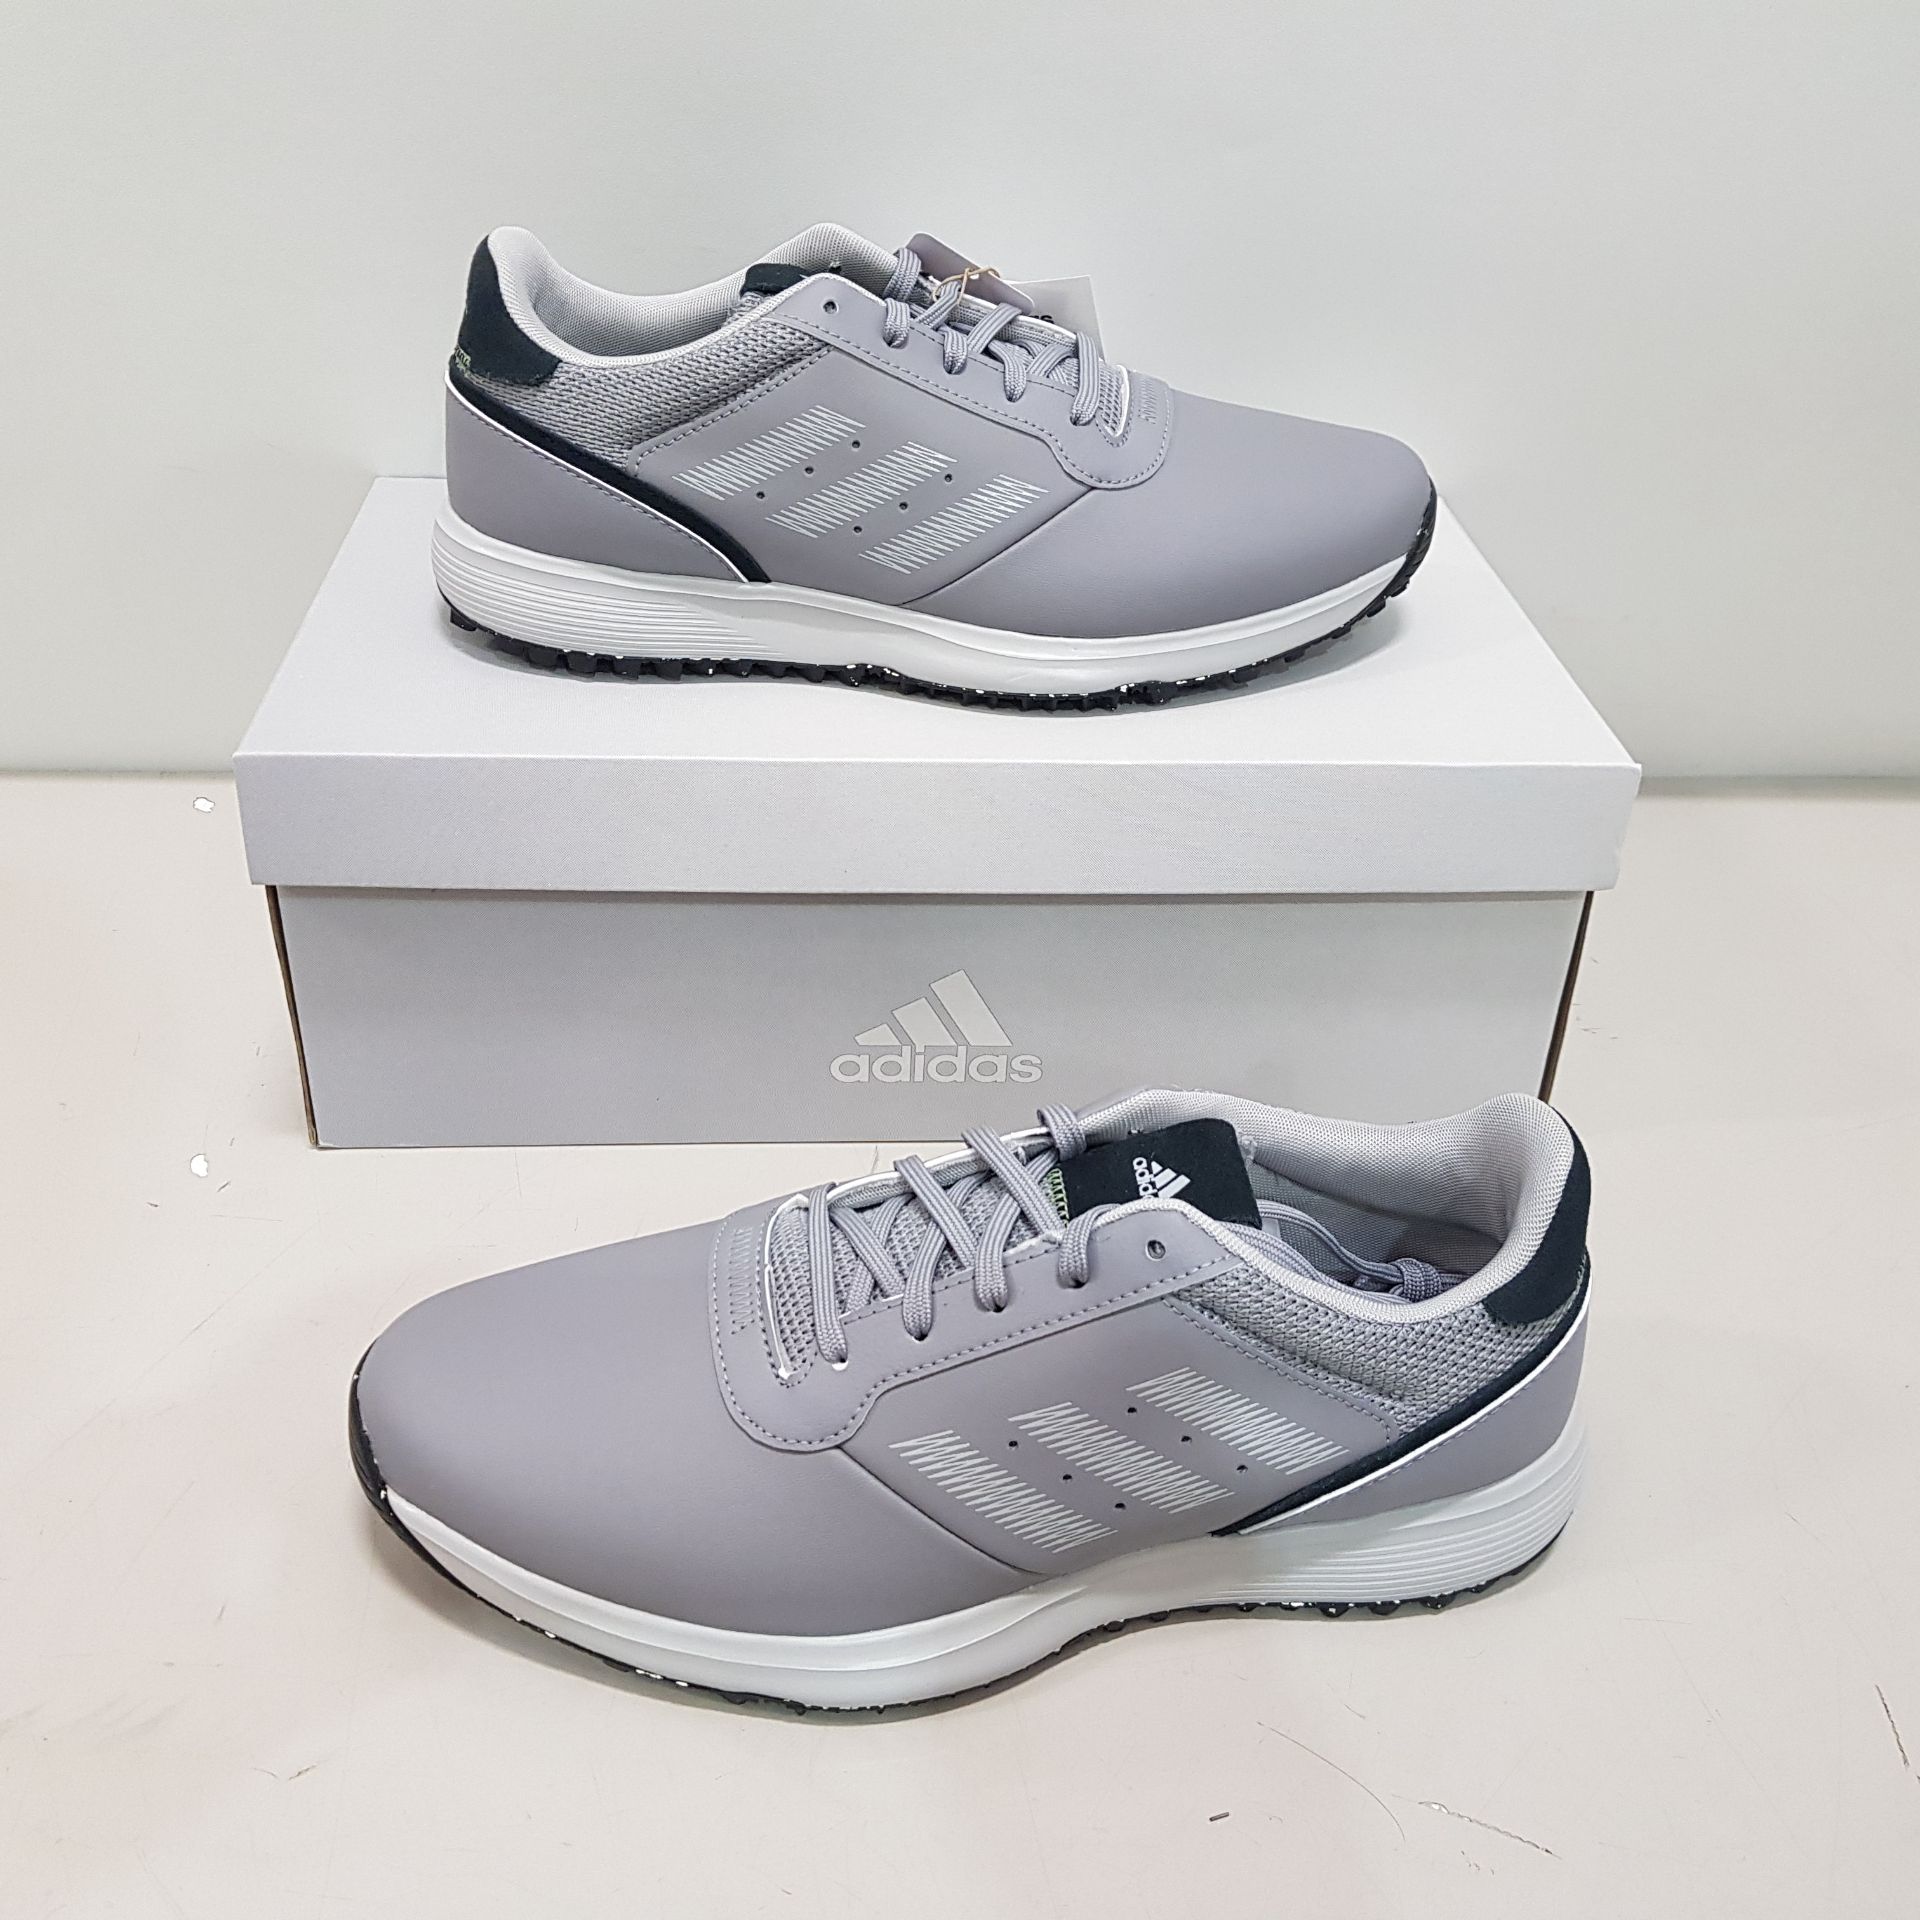 5 X BRAND NEW BOXED ADIDAS GOLF TRAINERS IN GREY / BLACK ALL IN SIZE UK 9 ( GZ3884)